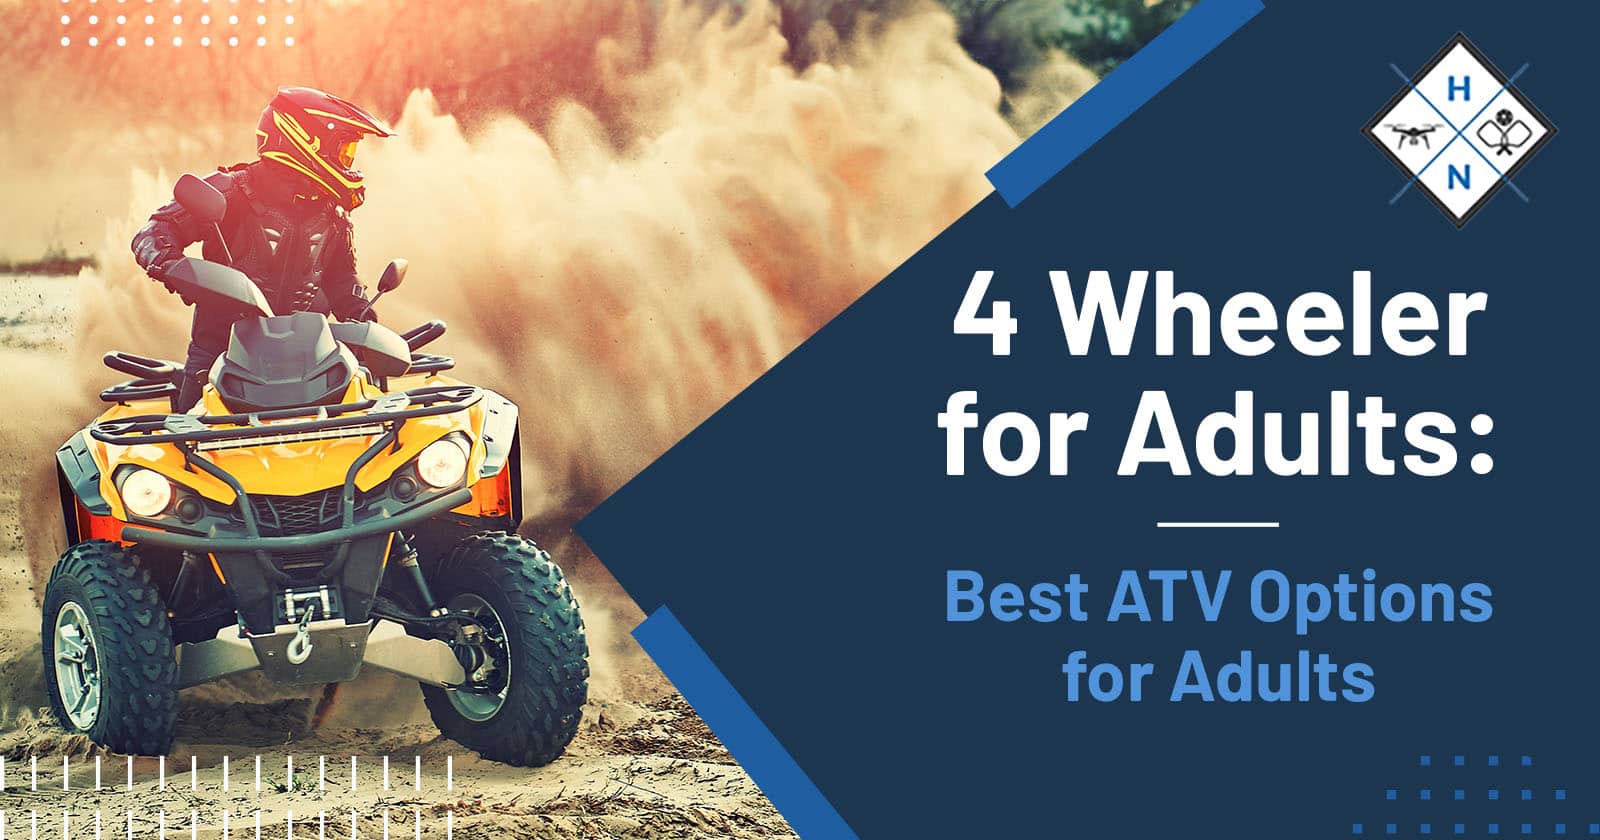 4 Wheeler for Adults: Best ATV Options for Adults